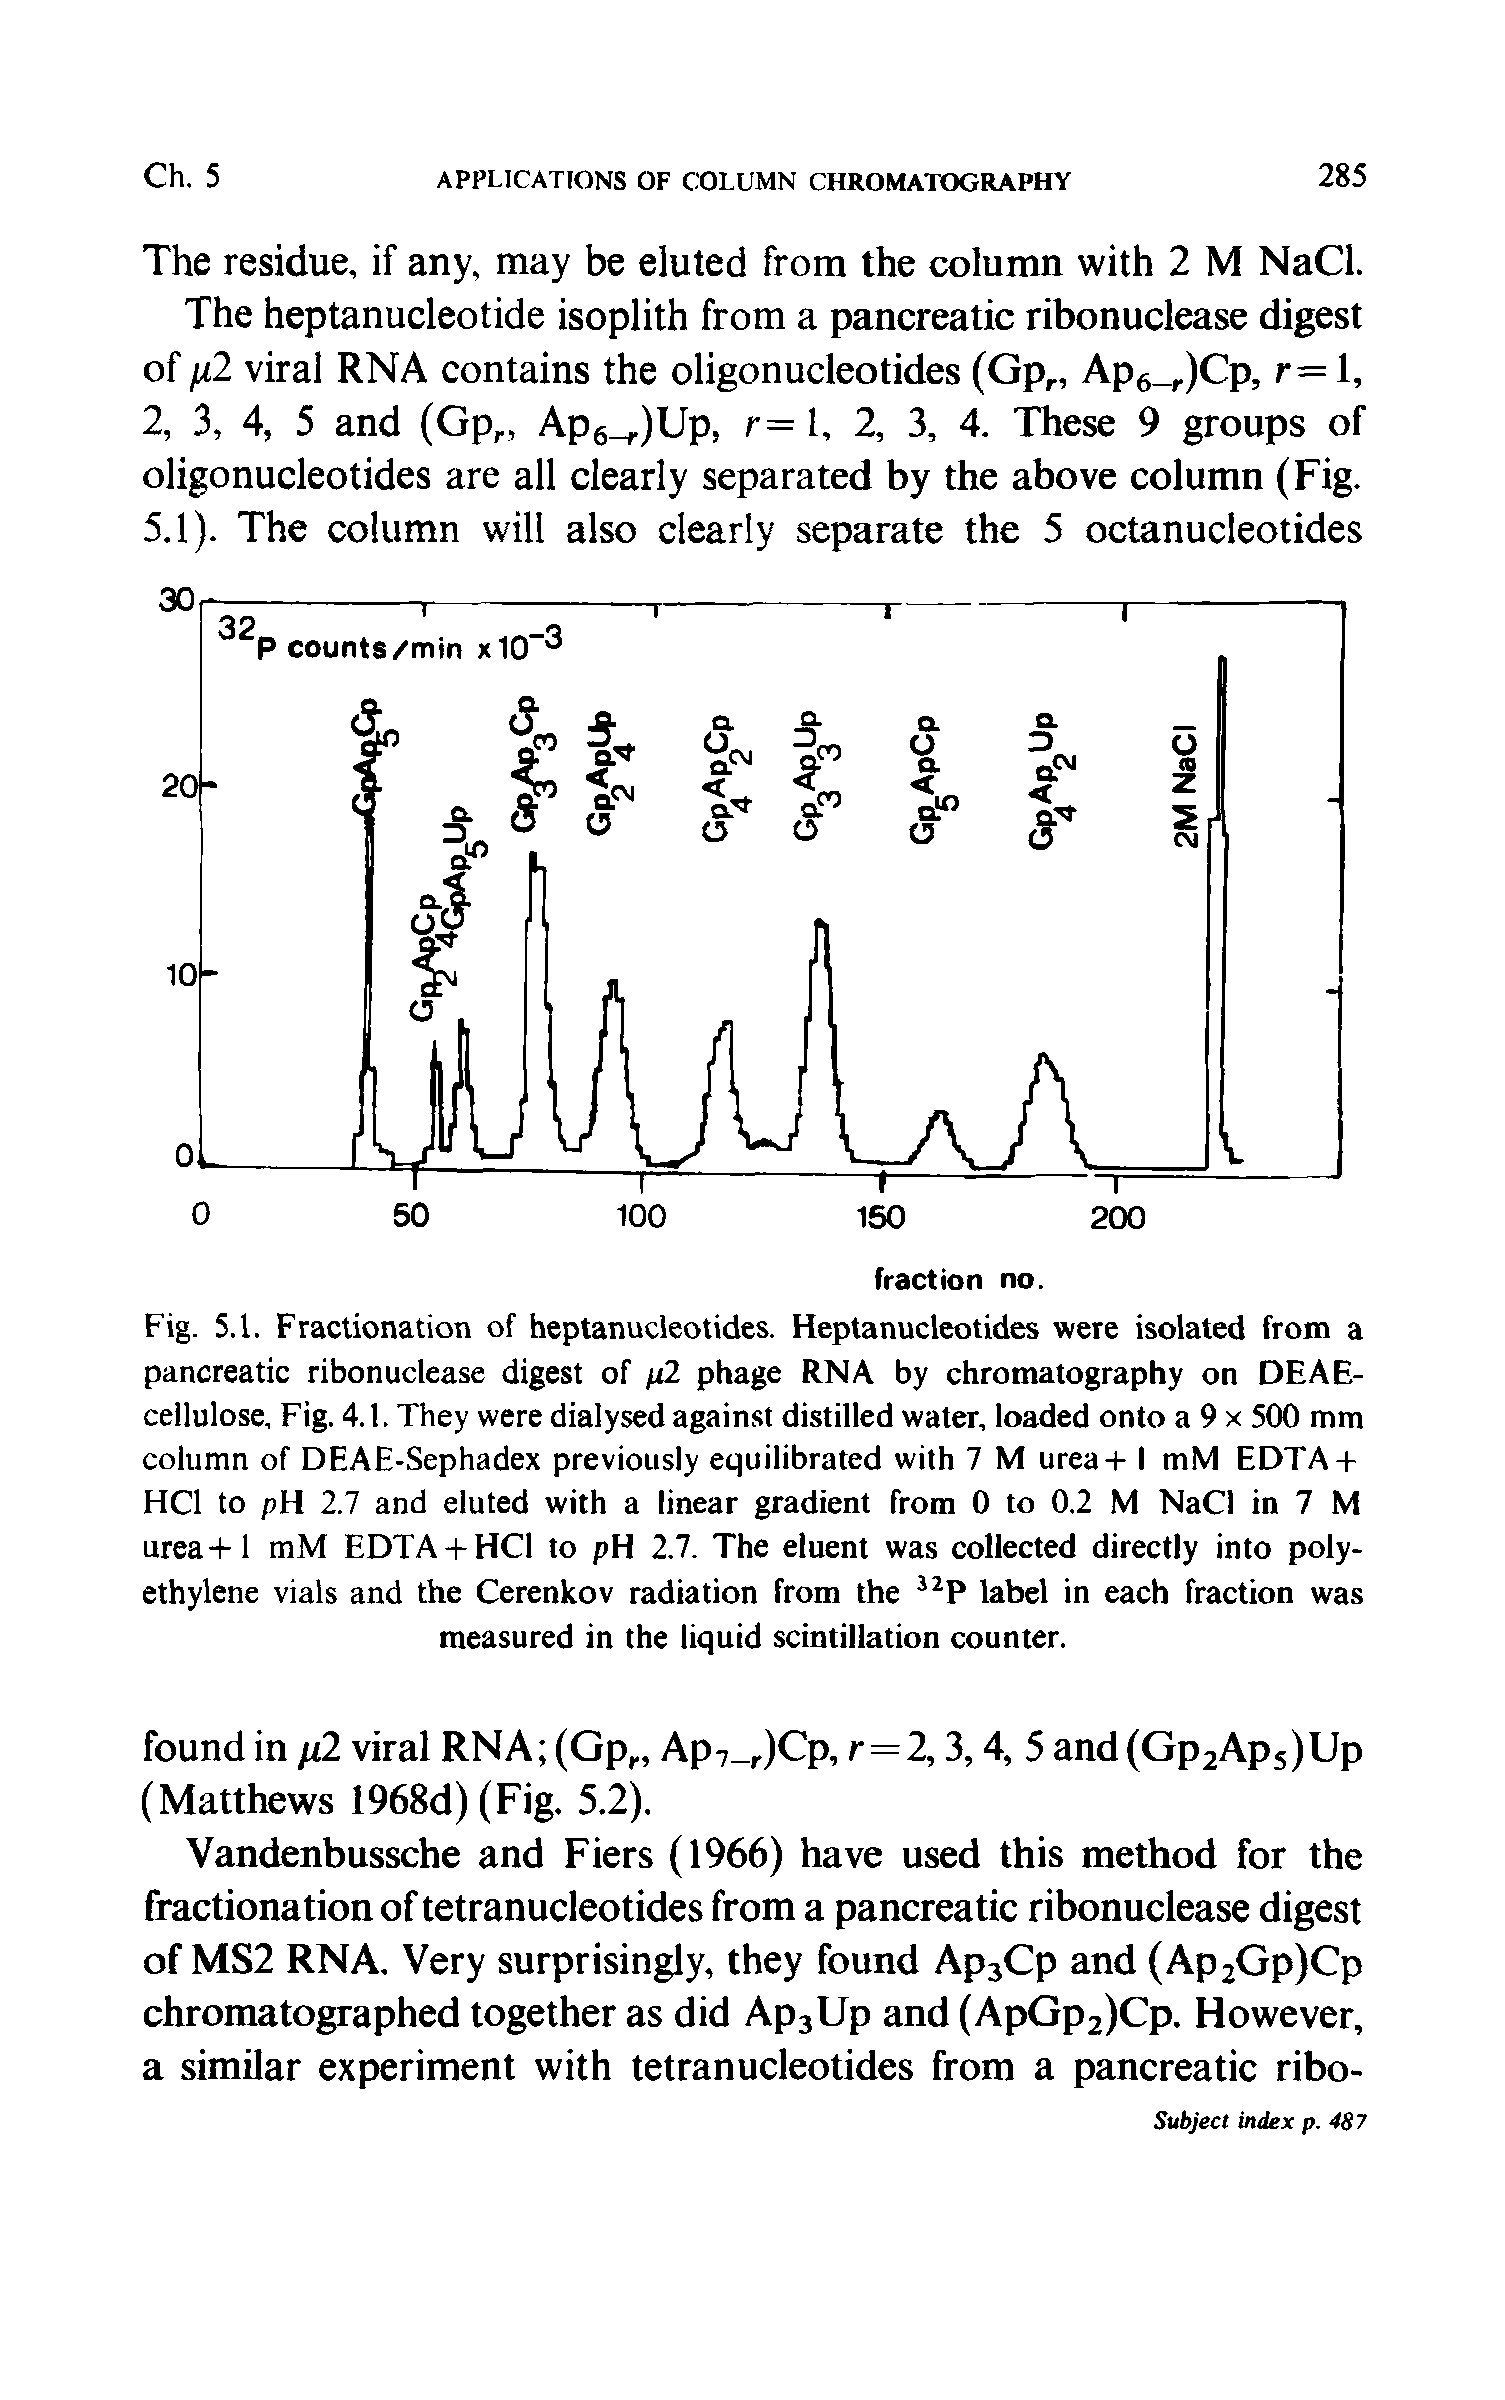 Fig. 5.1. Fractionation of heptanucleotides. Heptanucleotides were isolated from a pancreatic ribonuclease digest of l2 phage RNA by chromatography on DEAE-ceilulose. Fig. 4.1. They were dialysed against distilled water, loaded onto a 9 x 500 mm column of DEAE-Sephadex previously equilibrated with 7 M urea+ I mM EDTA + HCl to pH 2.7 and eluted with a linear gradient from 0 to 0.2 M NaCI in 7 M urea+1 mM EDTA + HCI to pH 2.7. The eluent was collected directly into polyethylene vials and the Cerenkov radiation from the label in each fraction was measured in the liquid scintillation counter.